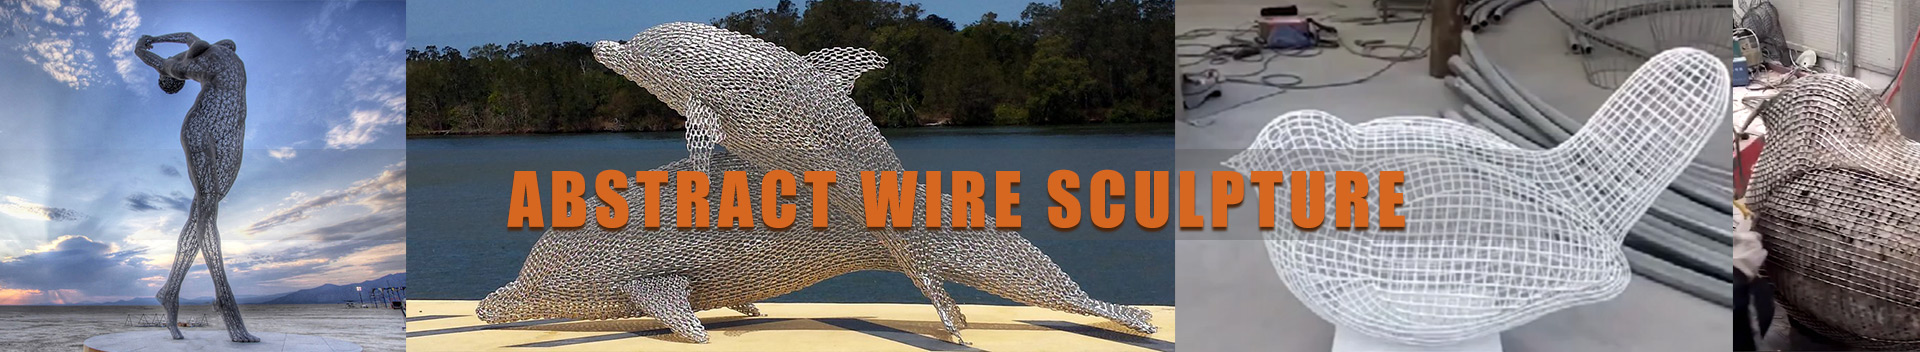 Abstract Wire Sculpture